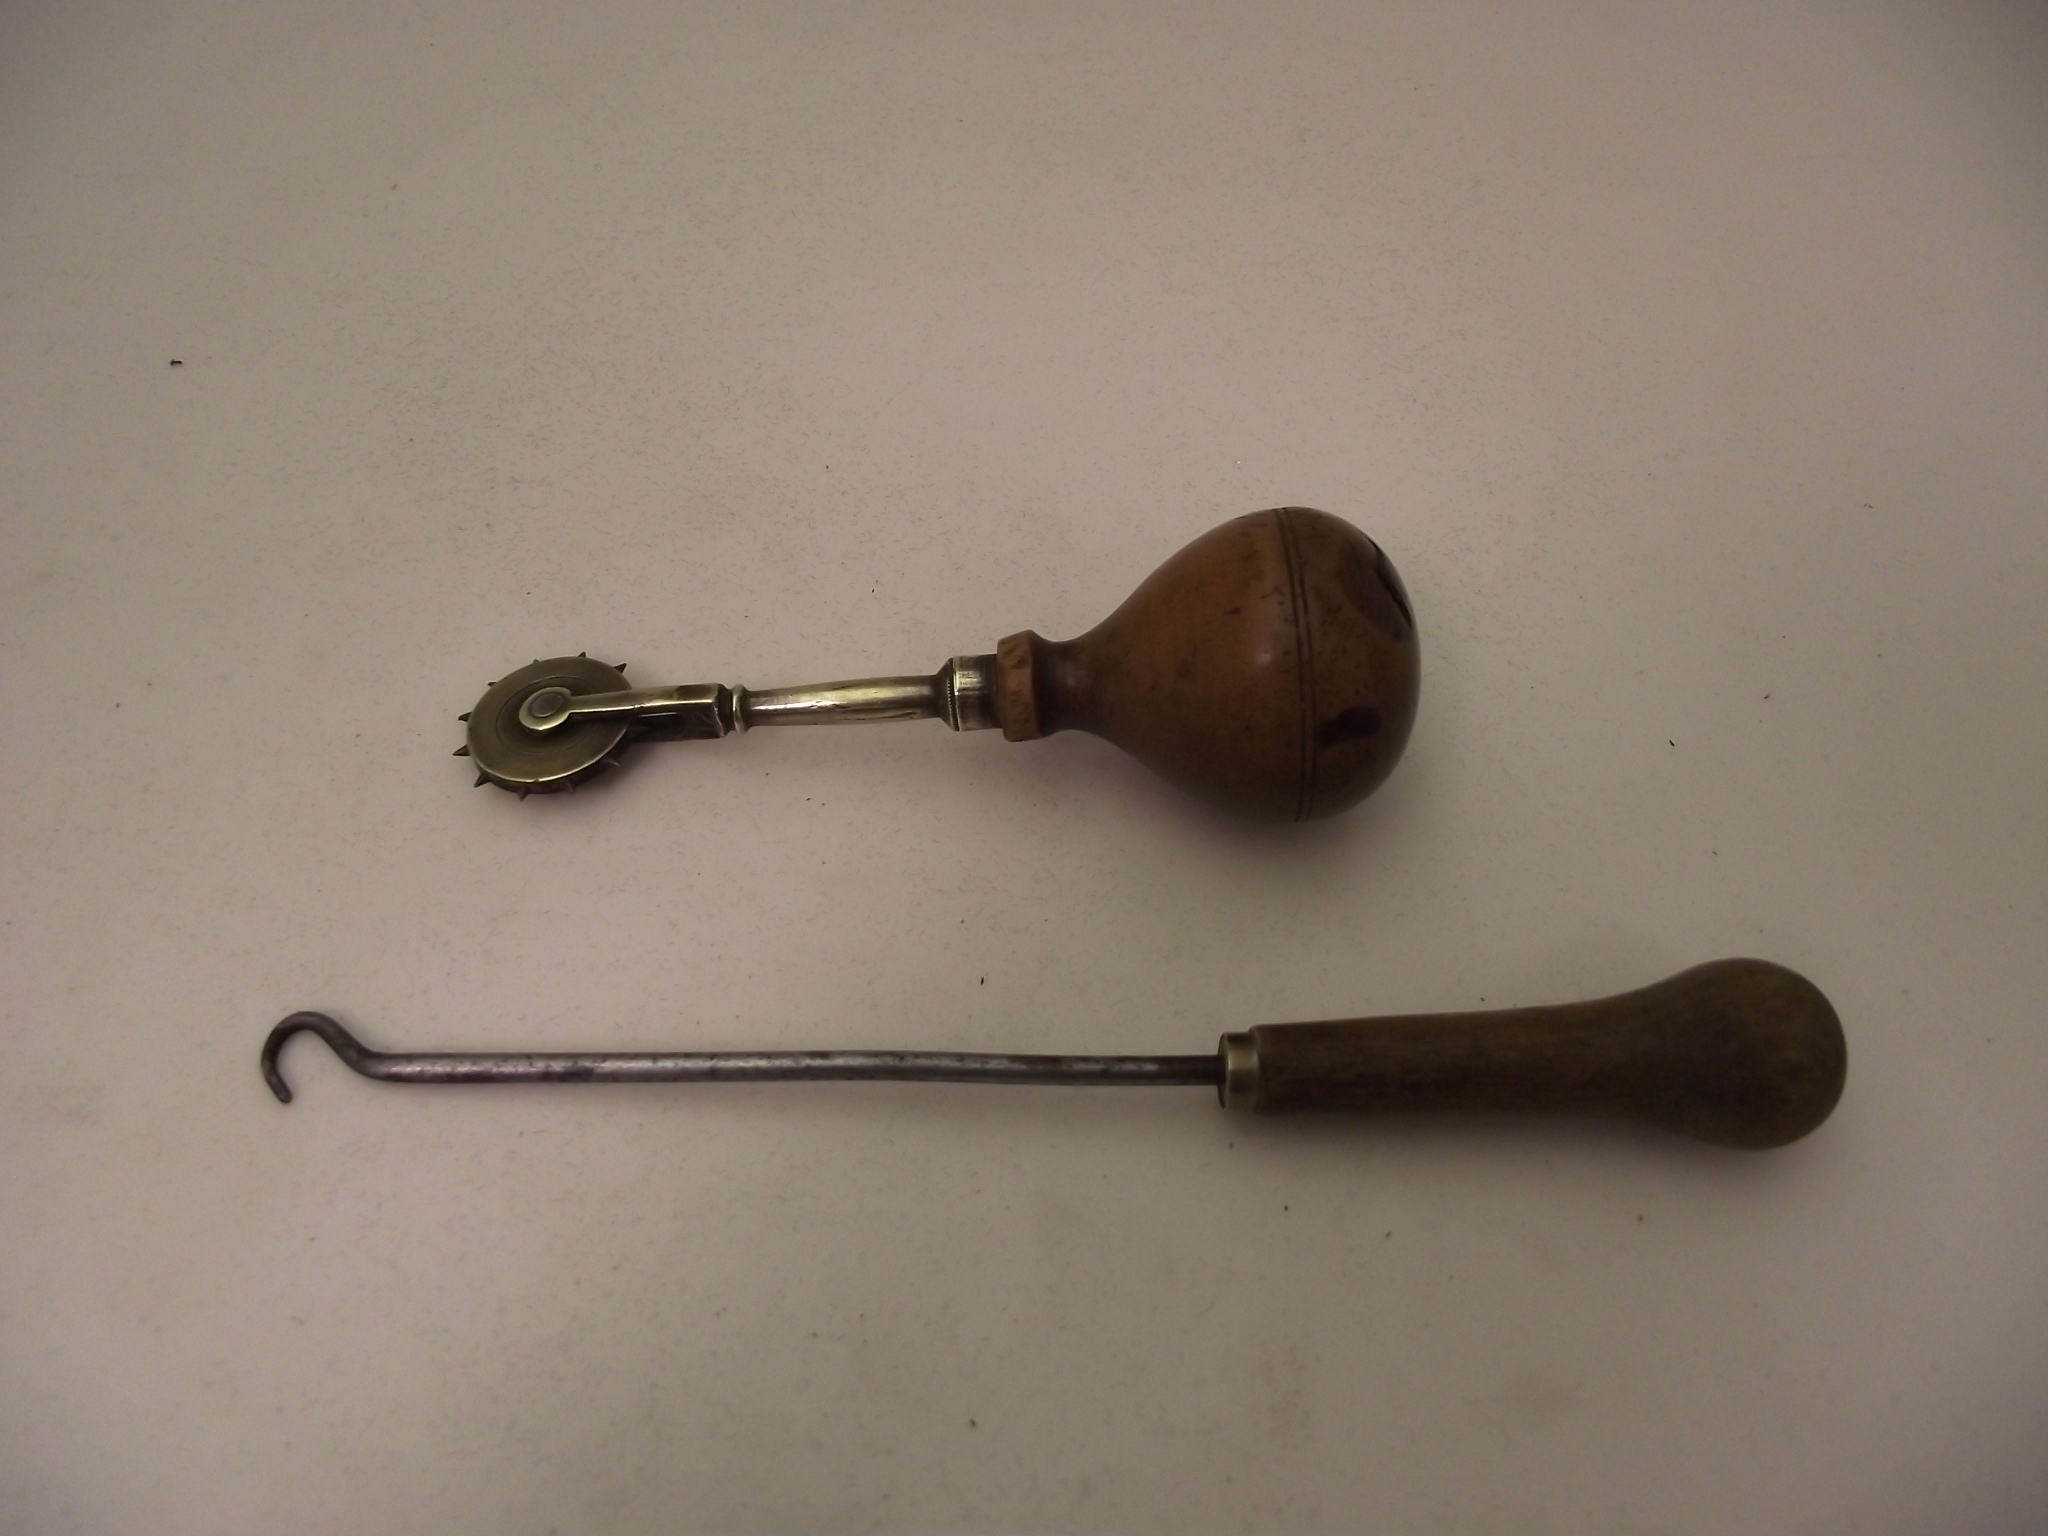  Button Hook and Leather stitch marking tool.